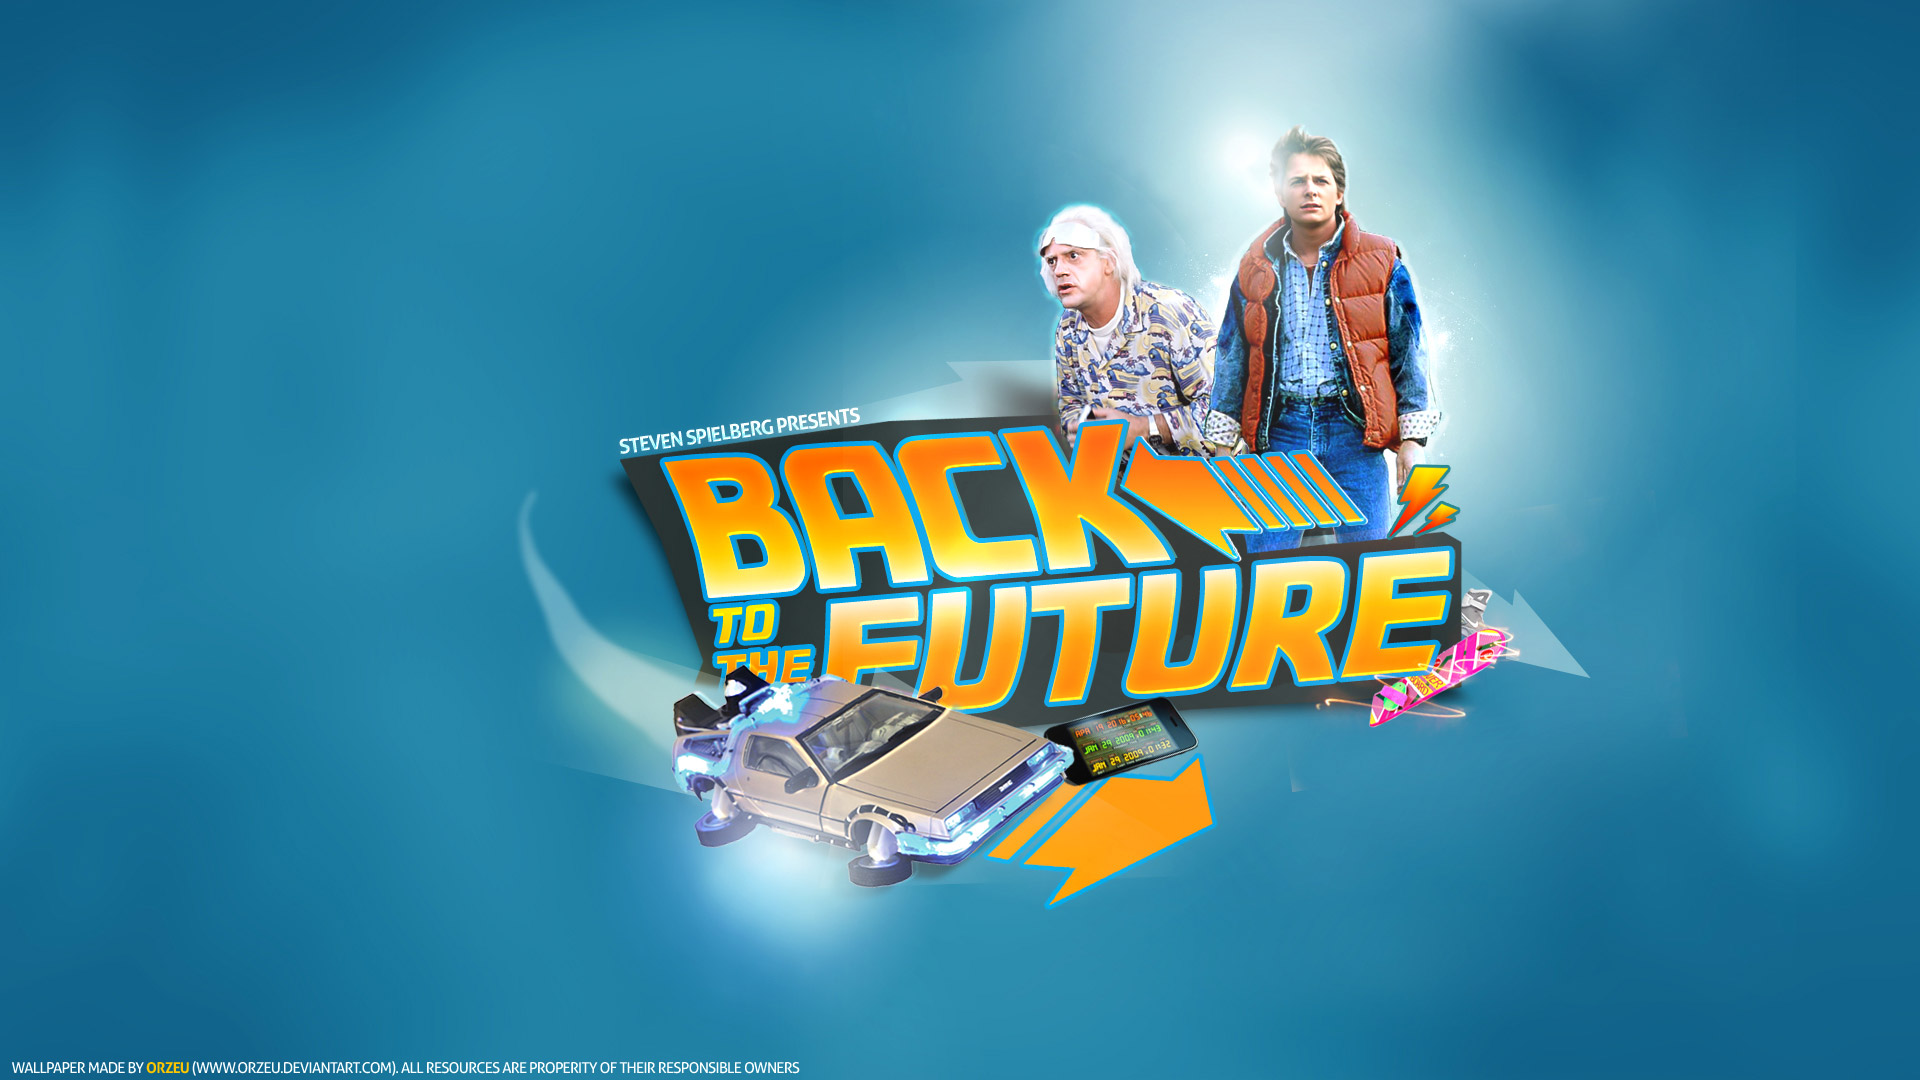 Back To The Future Back To The Future Ii Movies Back To The Future Iii Movie Car Marty McFly Dr Emme 1920x1080